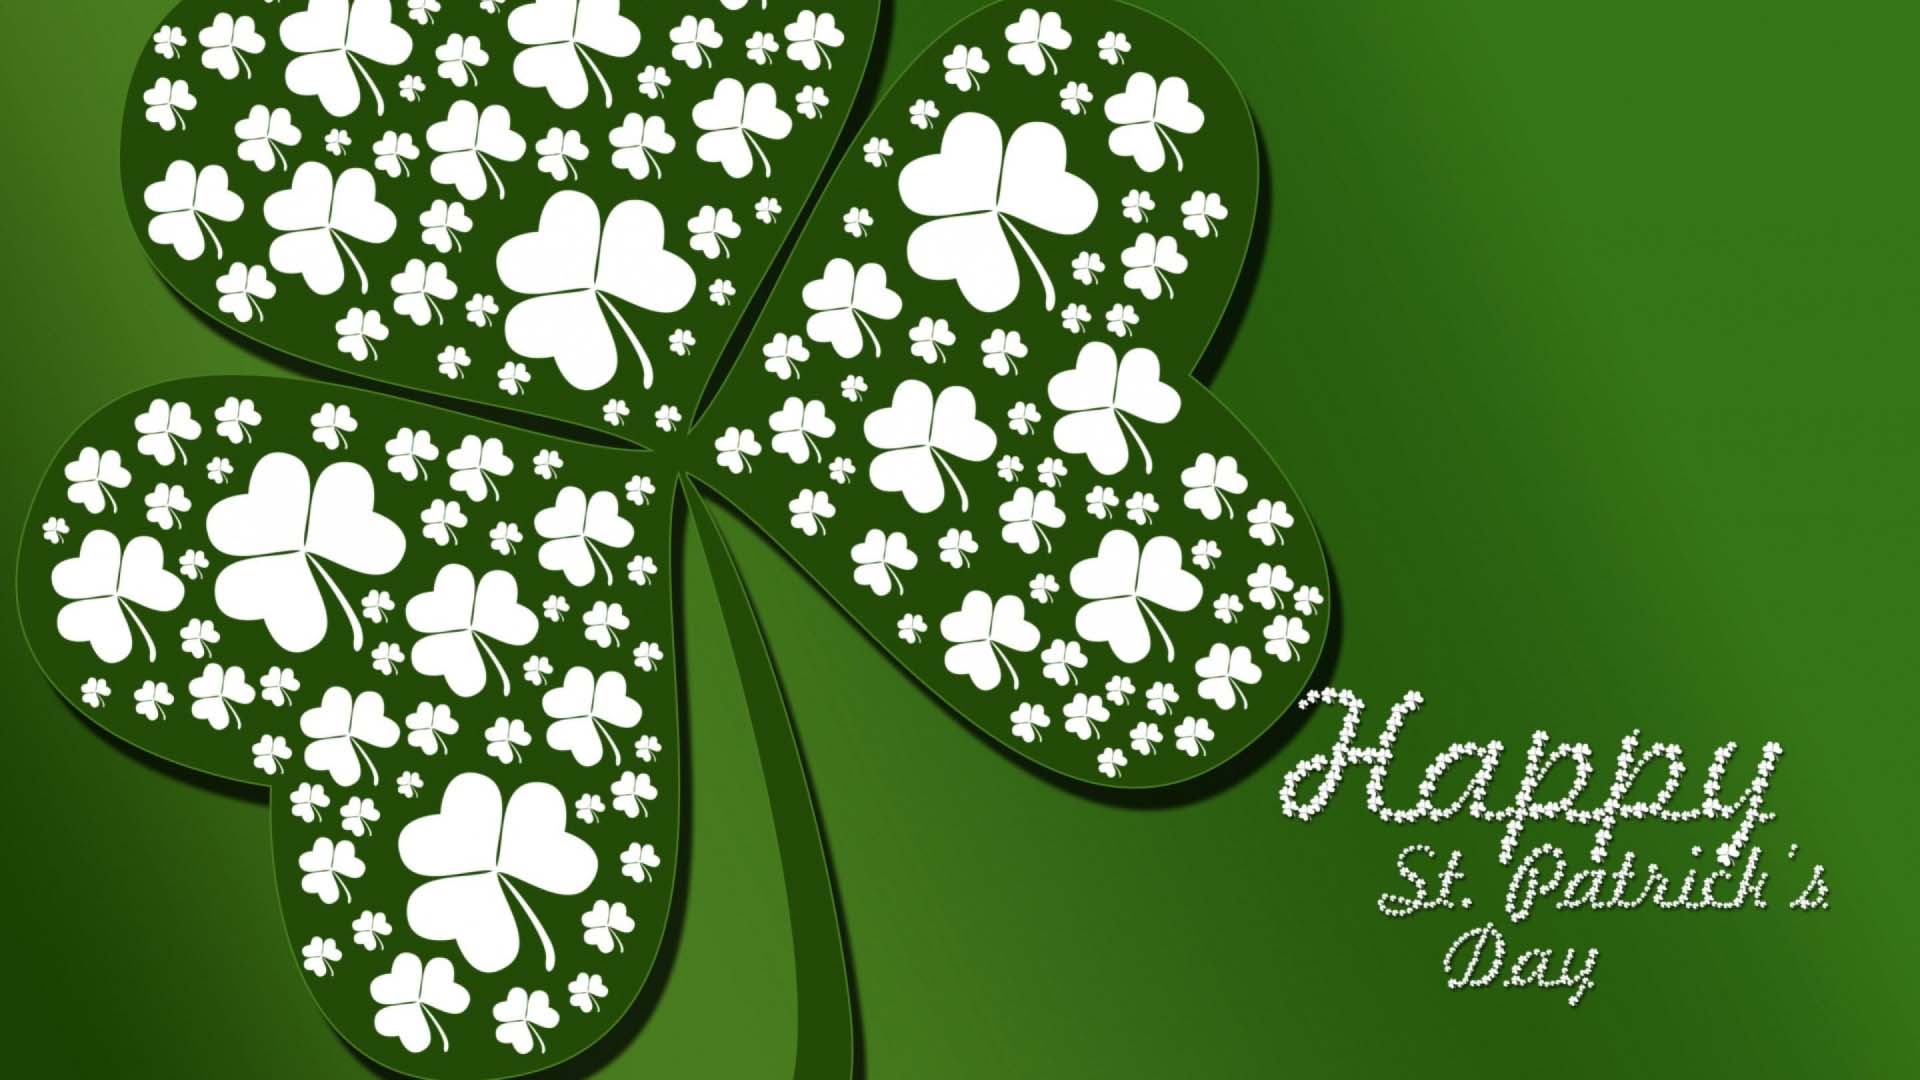 Green Gradient background with a large shamrock extended off the screen. Happy St Patrick's Day spelt out in the bottom right corner of the graphic